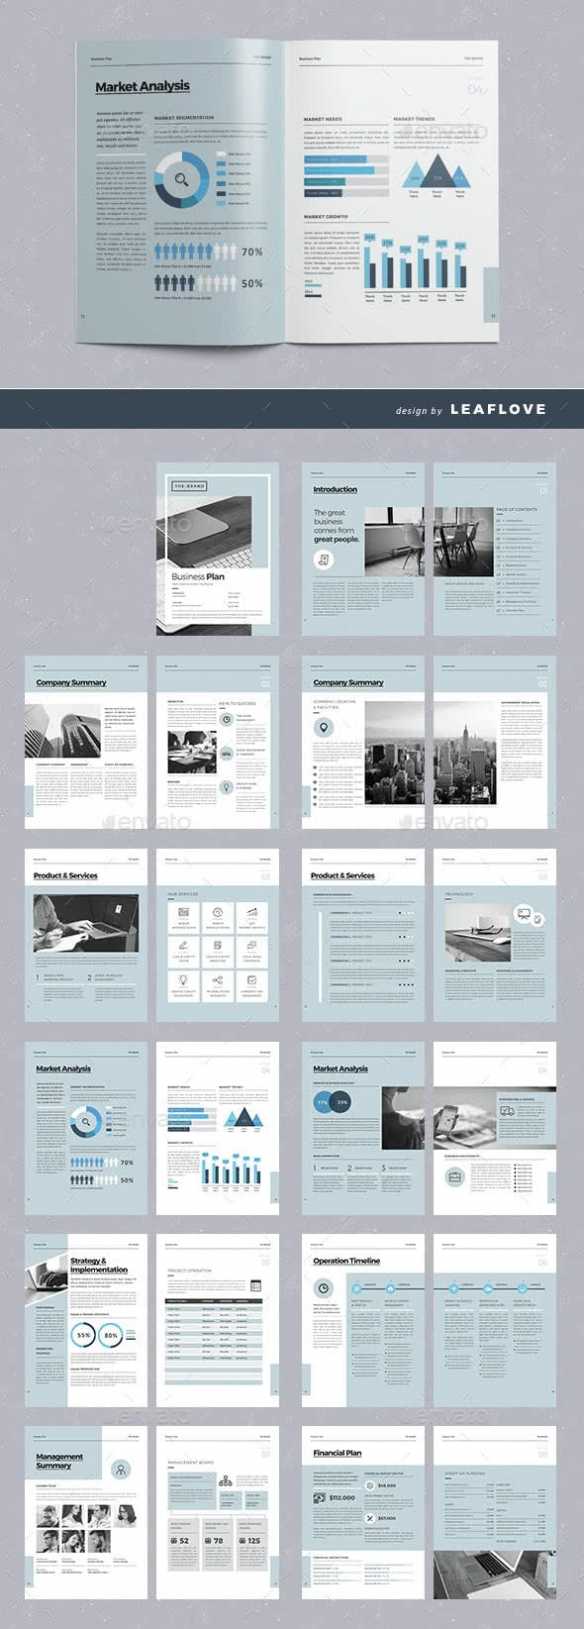 75 Fresh Indesign Templates (And Where To Find More) – Redokun with regard to Free Indesign Report Templates